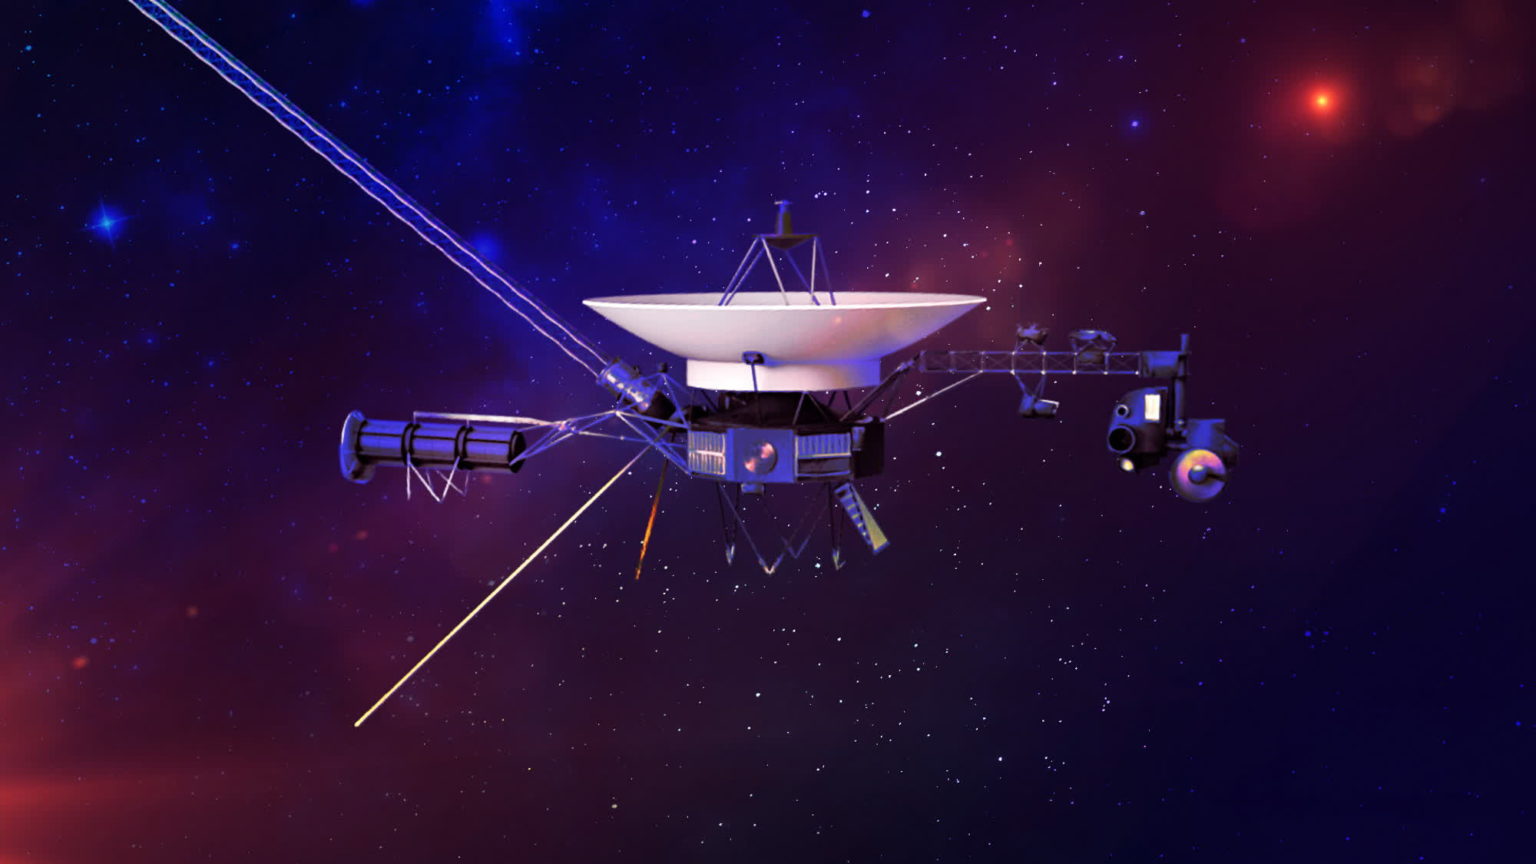 The Voyager 1 space probe is fully operational again, NASA confirms